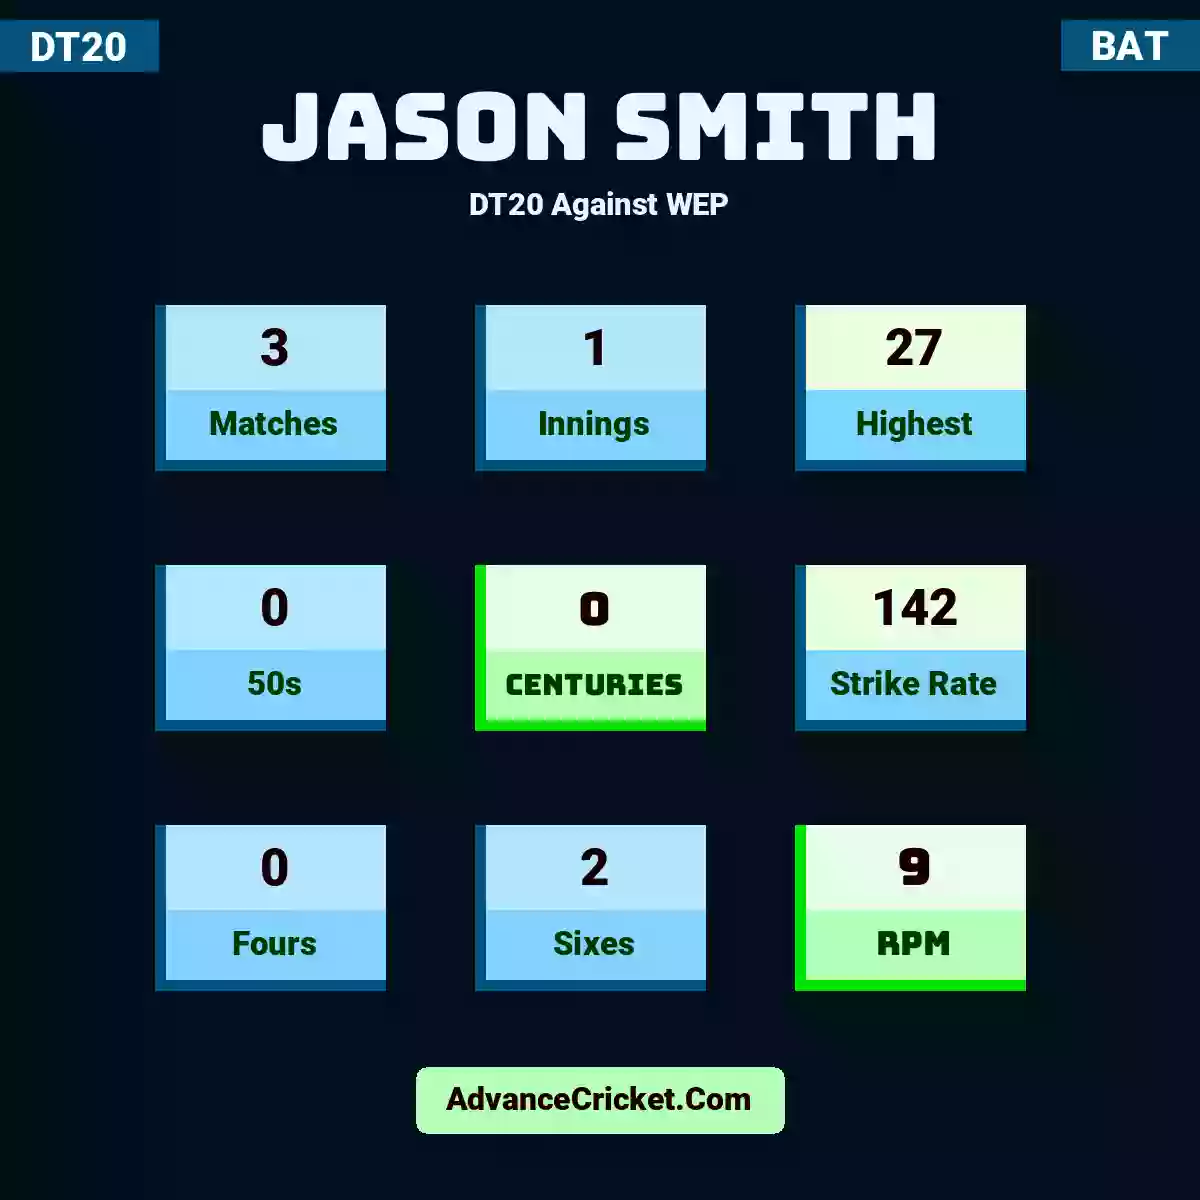 Jason Smith DT20  Against WEP, Jason Smith played 3 matches, scored 27 runs as highest, 0 half-centuries, and 0 centuries, with a strike rate of 142. J.Smith hit 0 fours and 2 sixes, with an RPM of 9.